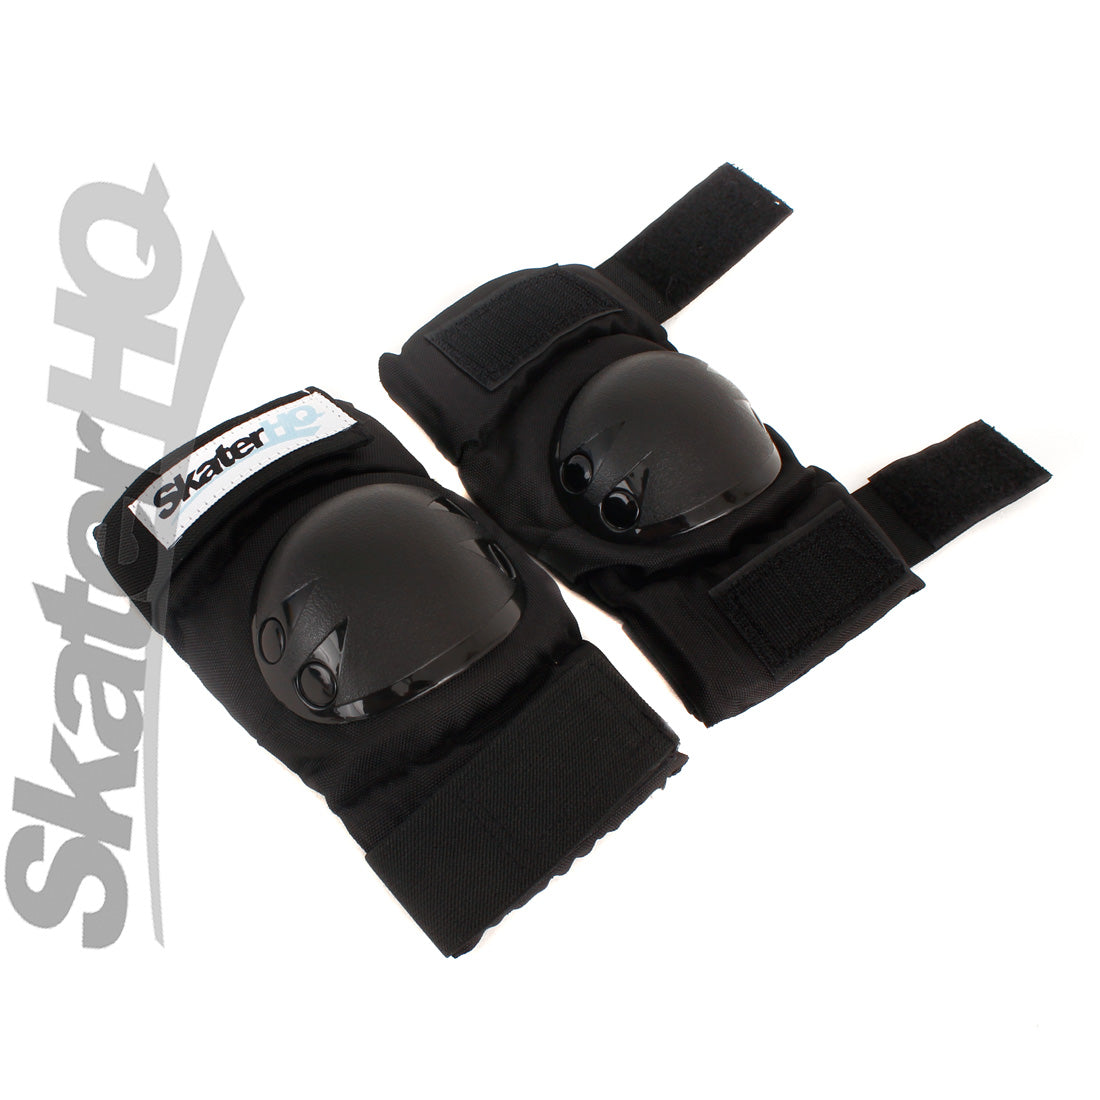 Skater HQ Elbow Pads - Small Protective Gear